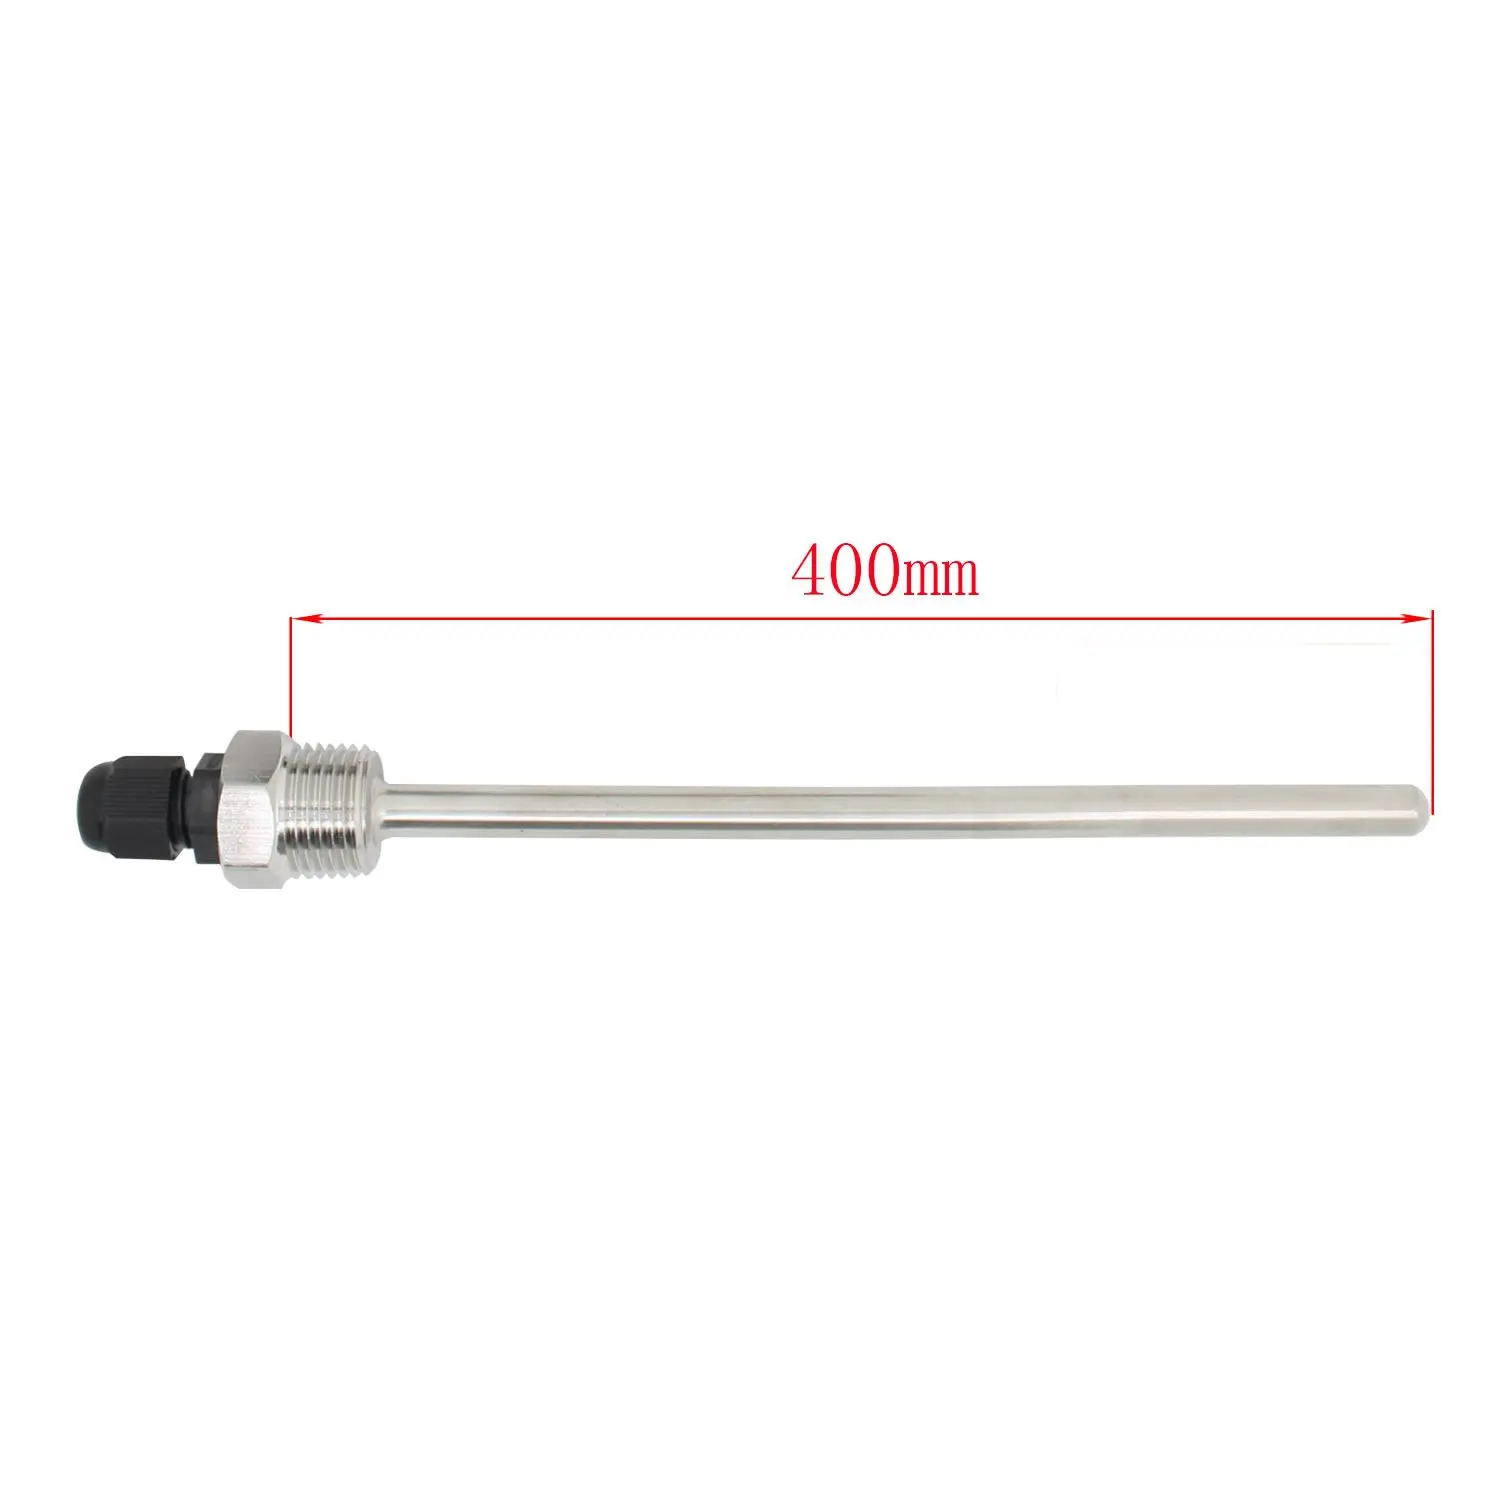 500mm 1/2 inch thermowell Stainless Steel 304 with Plastic Cap for Beer fermenter ds18b20 pt100 Homebrew Boiler 30mm 50mm 100mm 150mm 200mm 300mm 400mm 500mm 